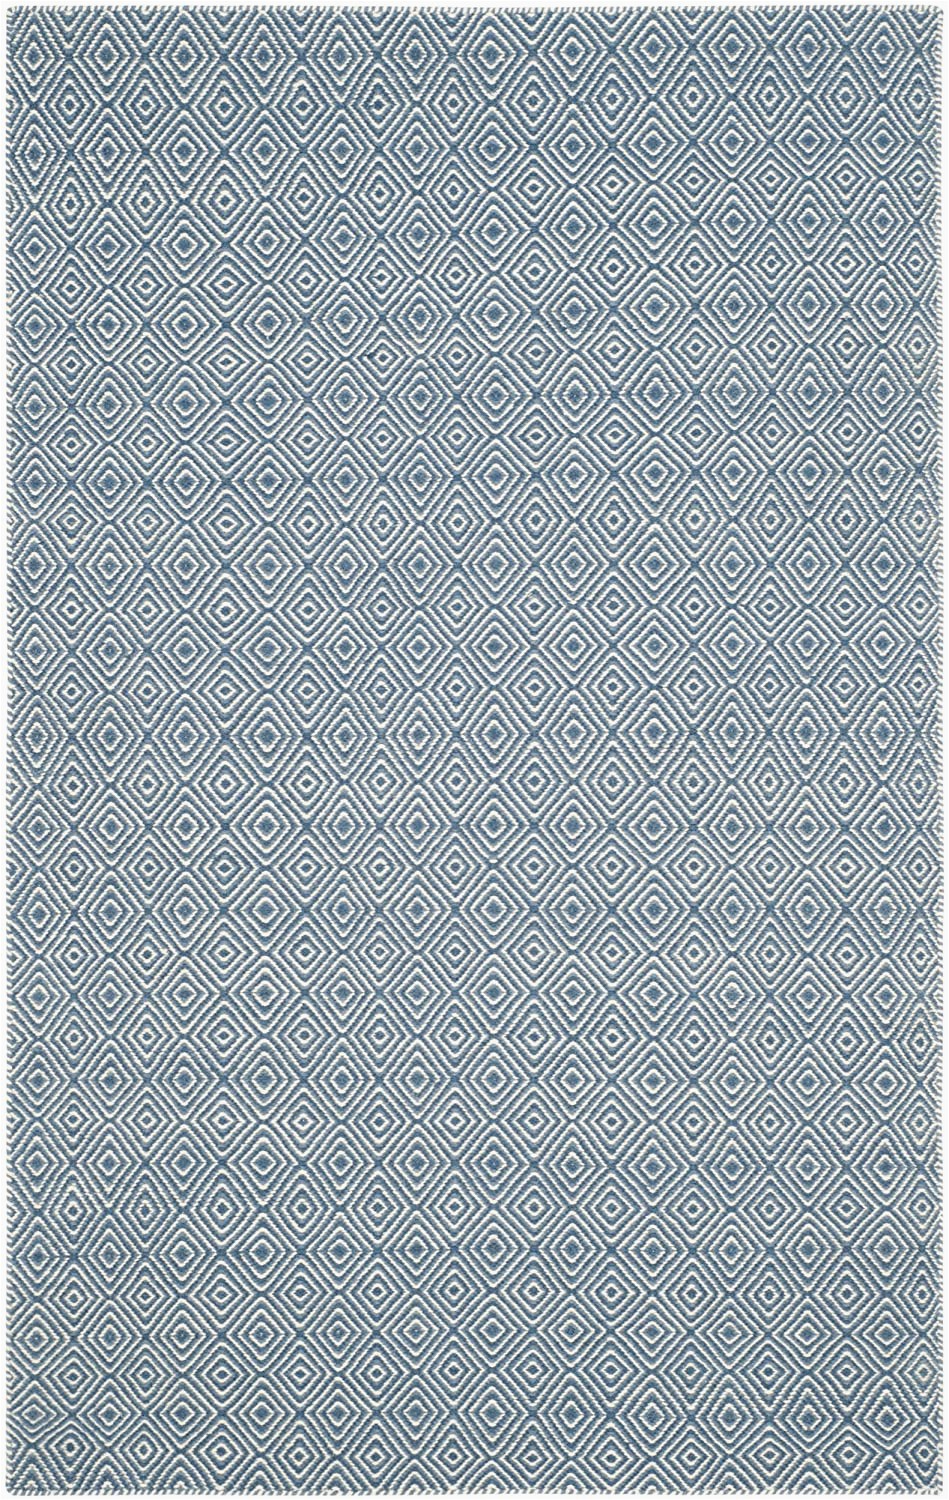 Safavieh Blue Wool Rug Safavieh Oasis Collection Oas525b Flat Weave Blue and Ivory Wool area Rug 9 X 12